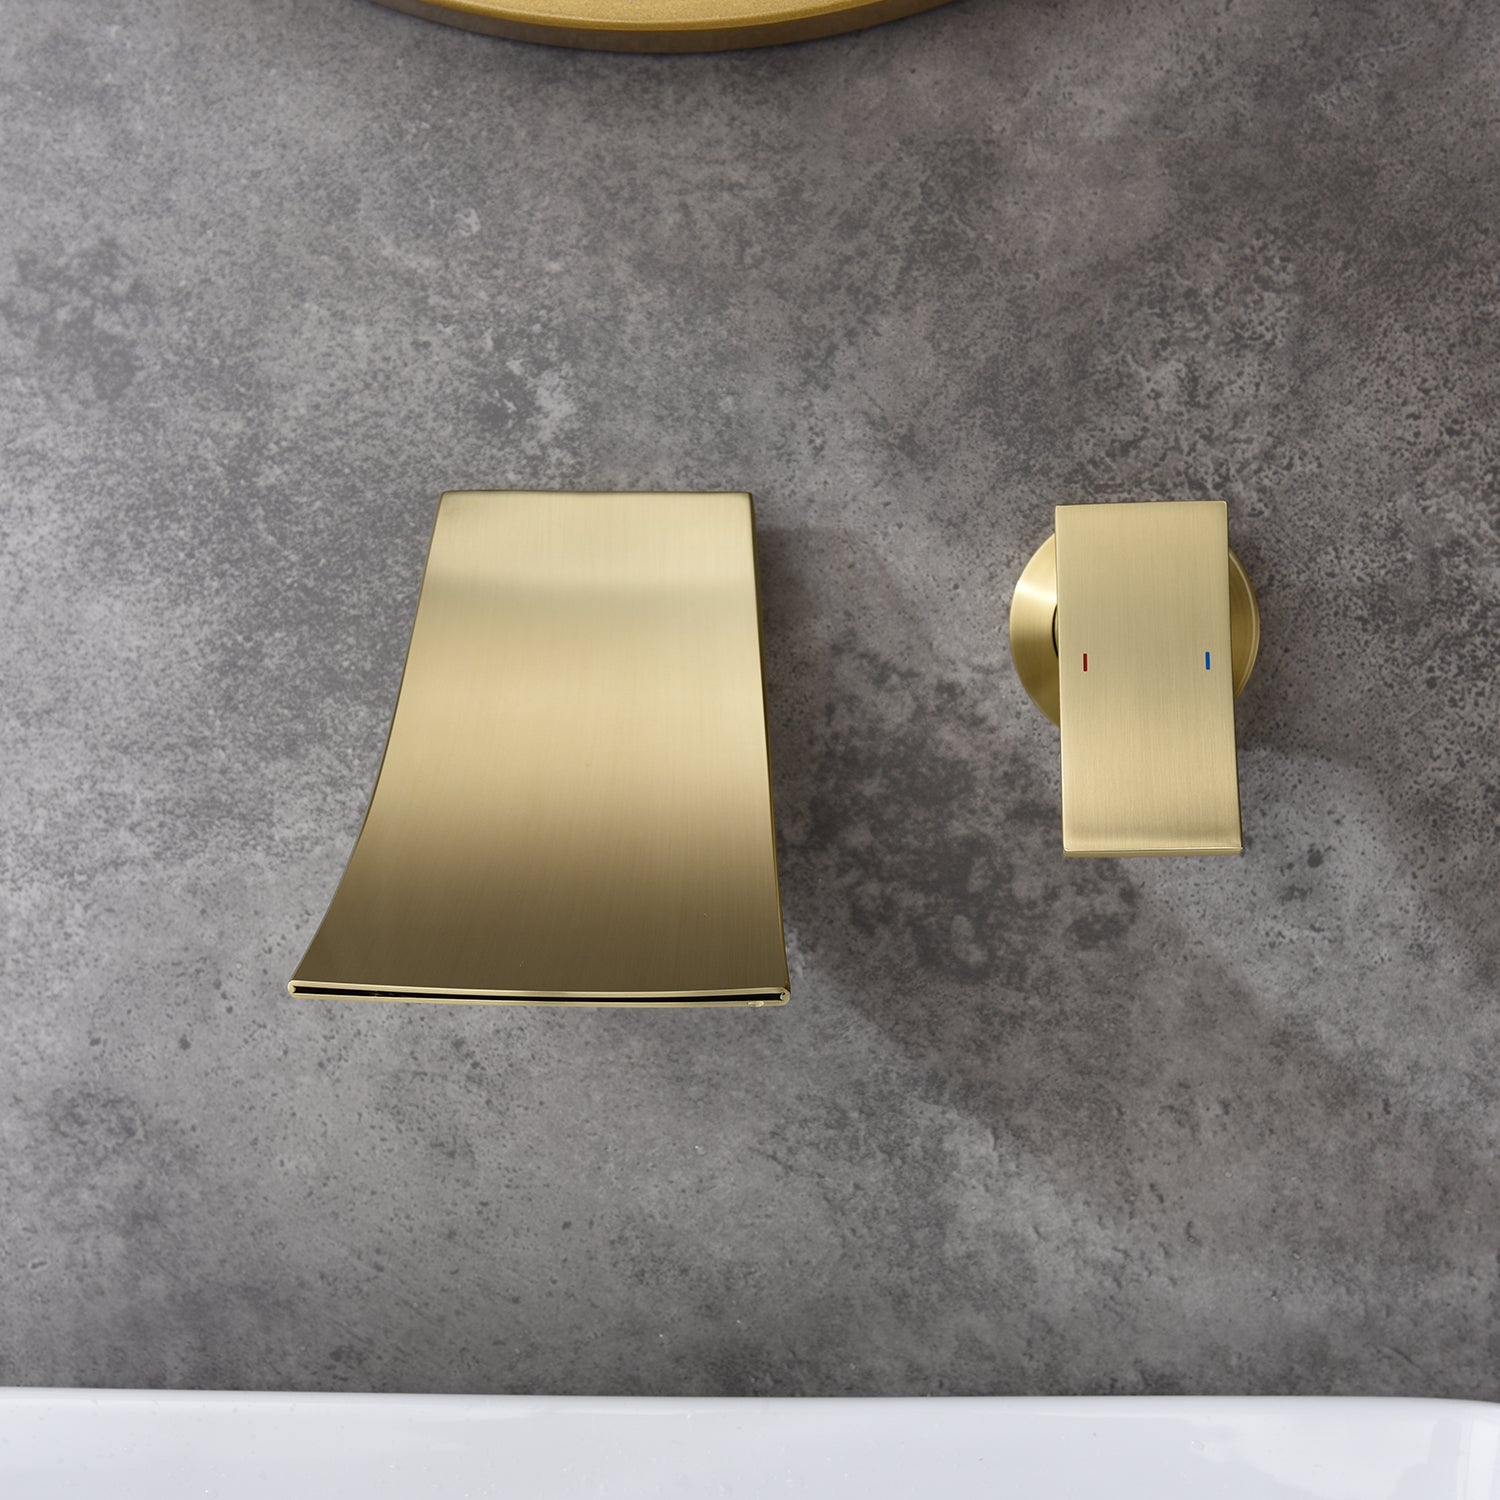 Gold Bathroom Faucet Wall Mounted for Sink Waterfall 2 Holes Single Handle Brass Stainless Steel Commercial Modern Easy to Install